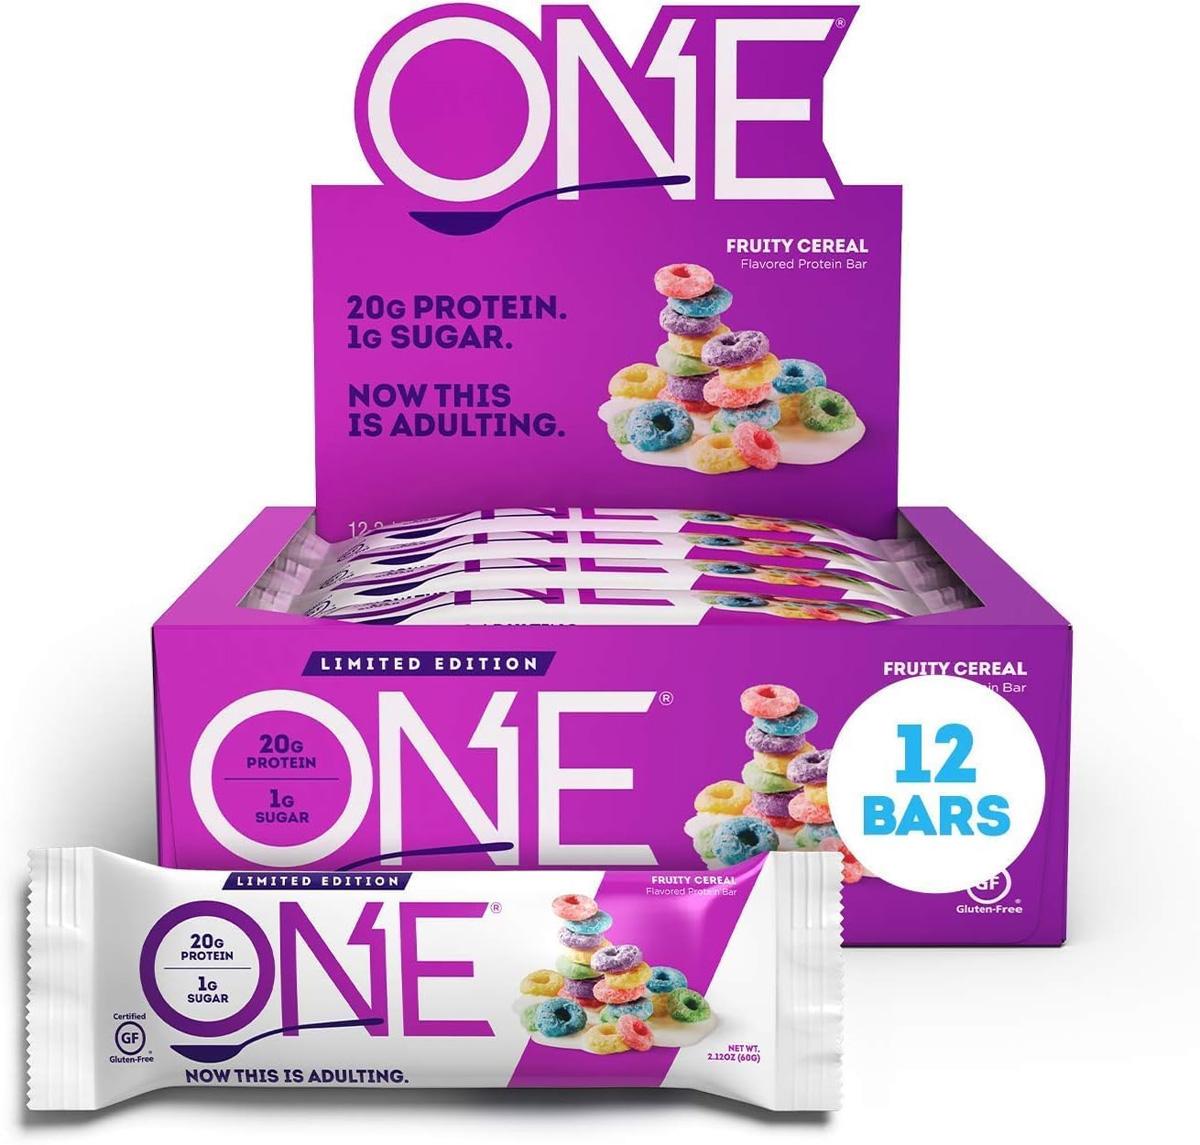 ONE Fruity Cereal Protein Bars 12 Pack for $14.57